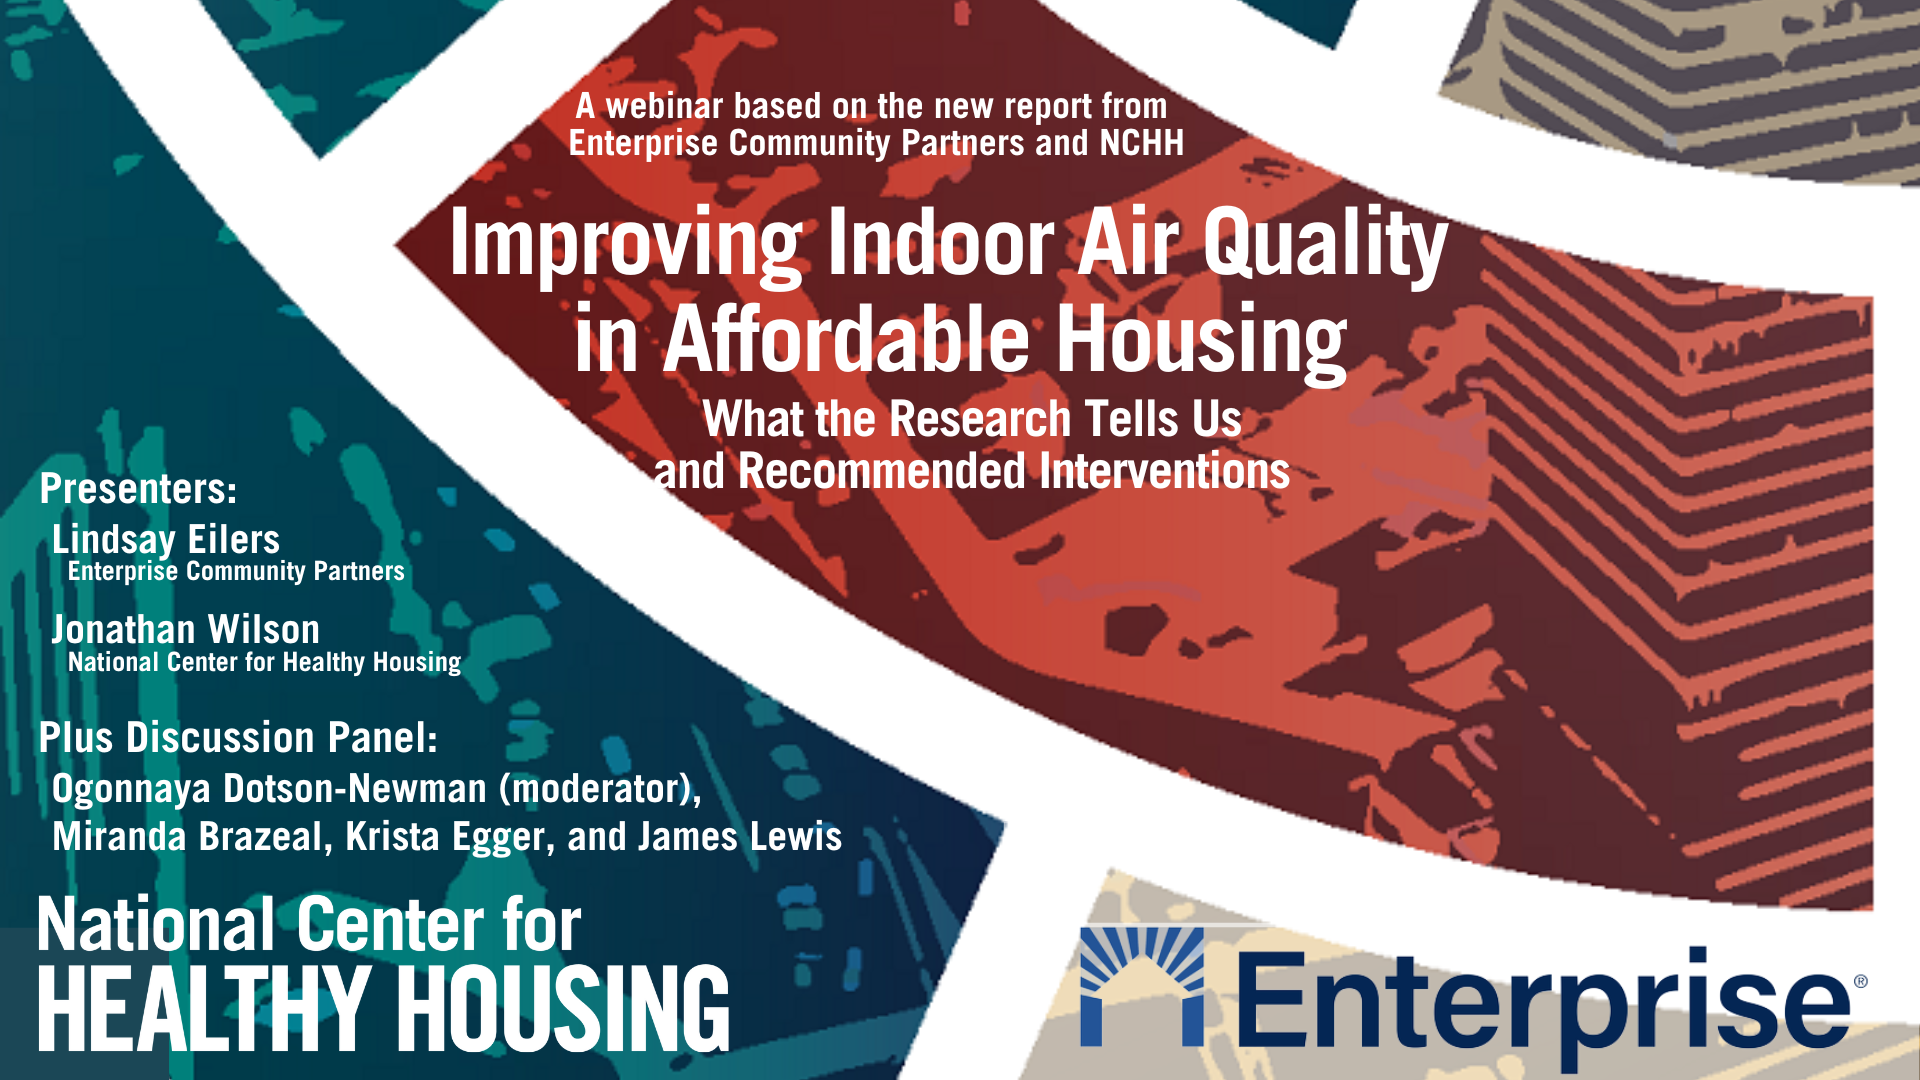 Improving Indoor Air Quality in Affordable Housing What the Research Tells Us and Recommended Interventions